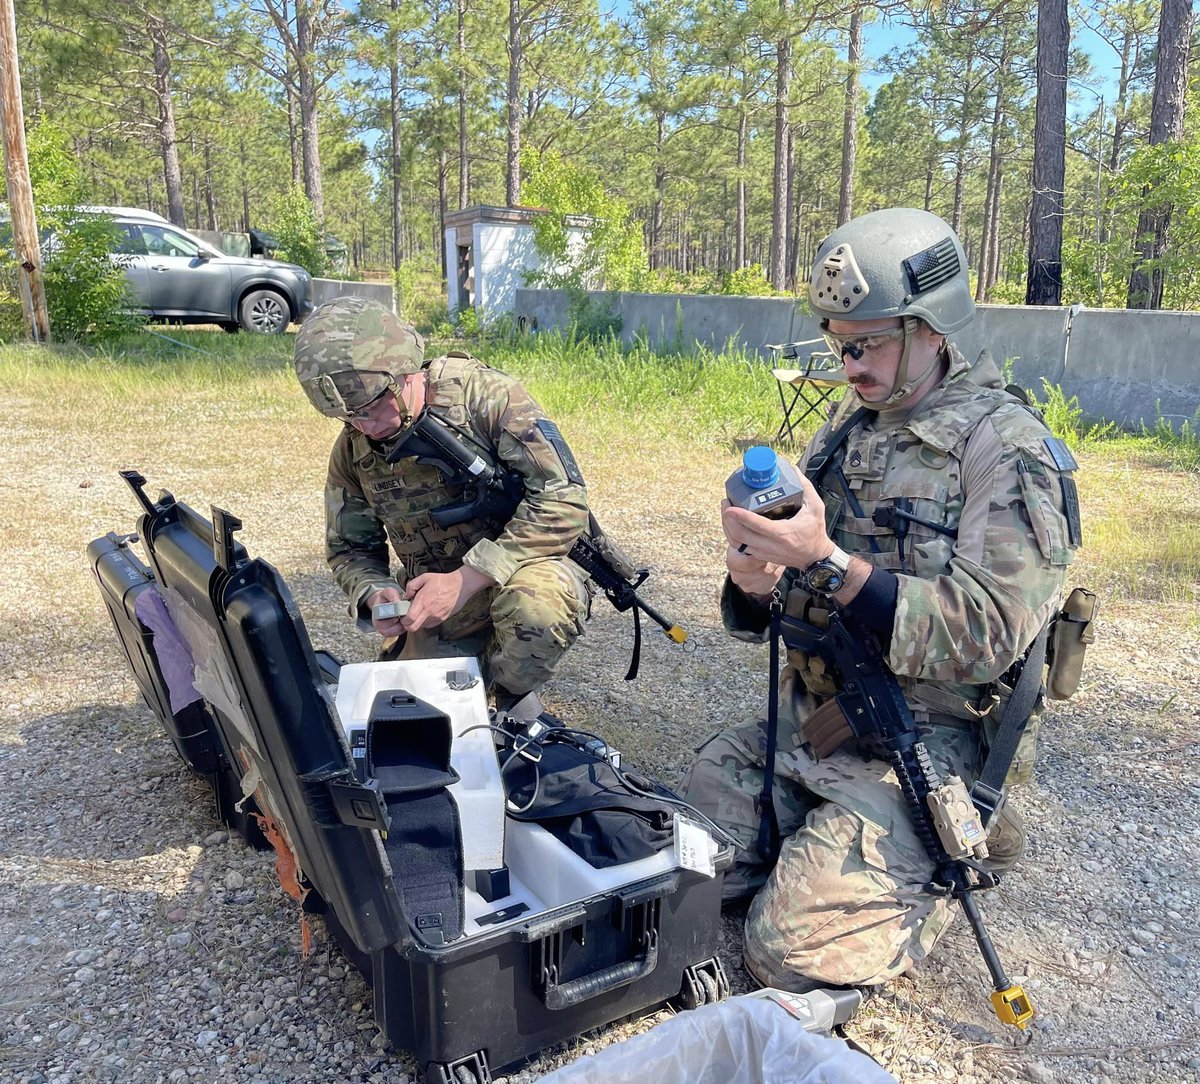 Staff Sgt. Tyler A. Grieve and Sgt. Tristin E. Lindsey from the 760th EOD Company took top honors during the all-Army EOD Team of the Year competition on Fort Liberty, North Carolina, April 21 – 26. Read full story:
dvidshub.net/news/470019/fo…

#EOD #USArmy #LibertyWeDefend